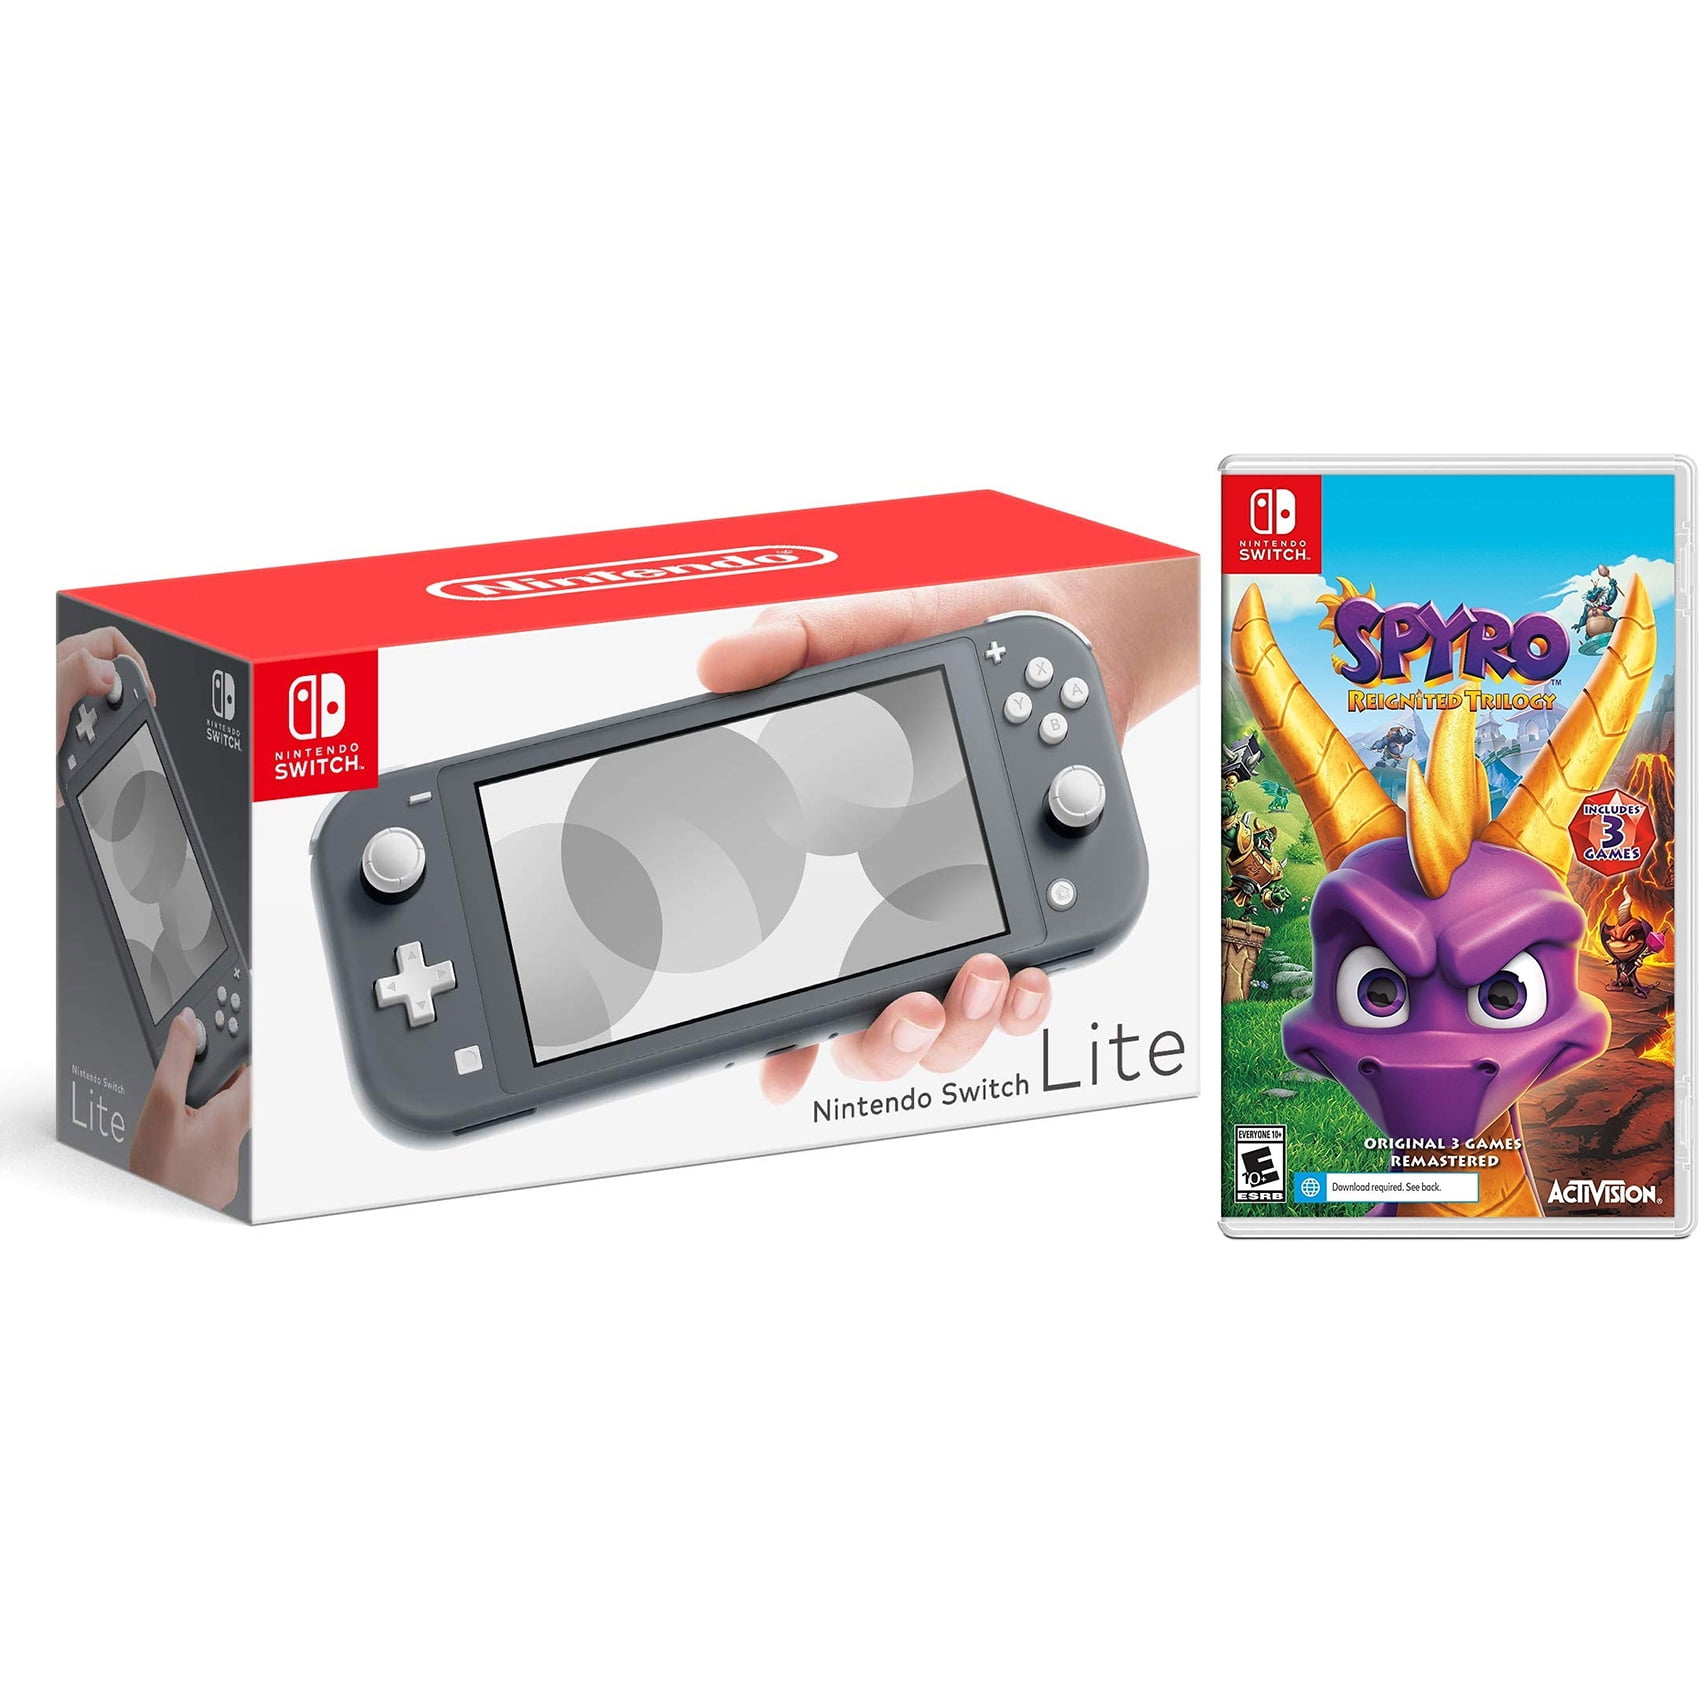 Nintendo Switch Lite 32GB Turquoise and Spyro Reignited Trilogy 